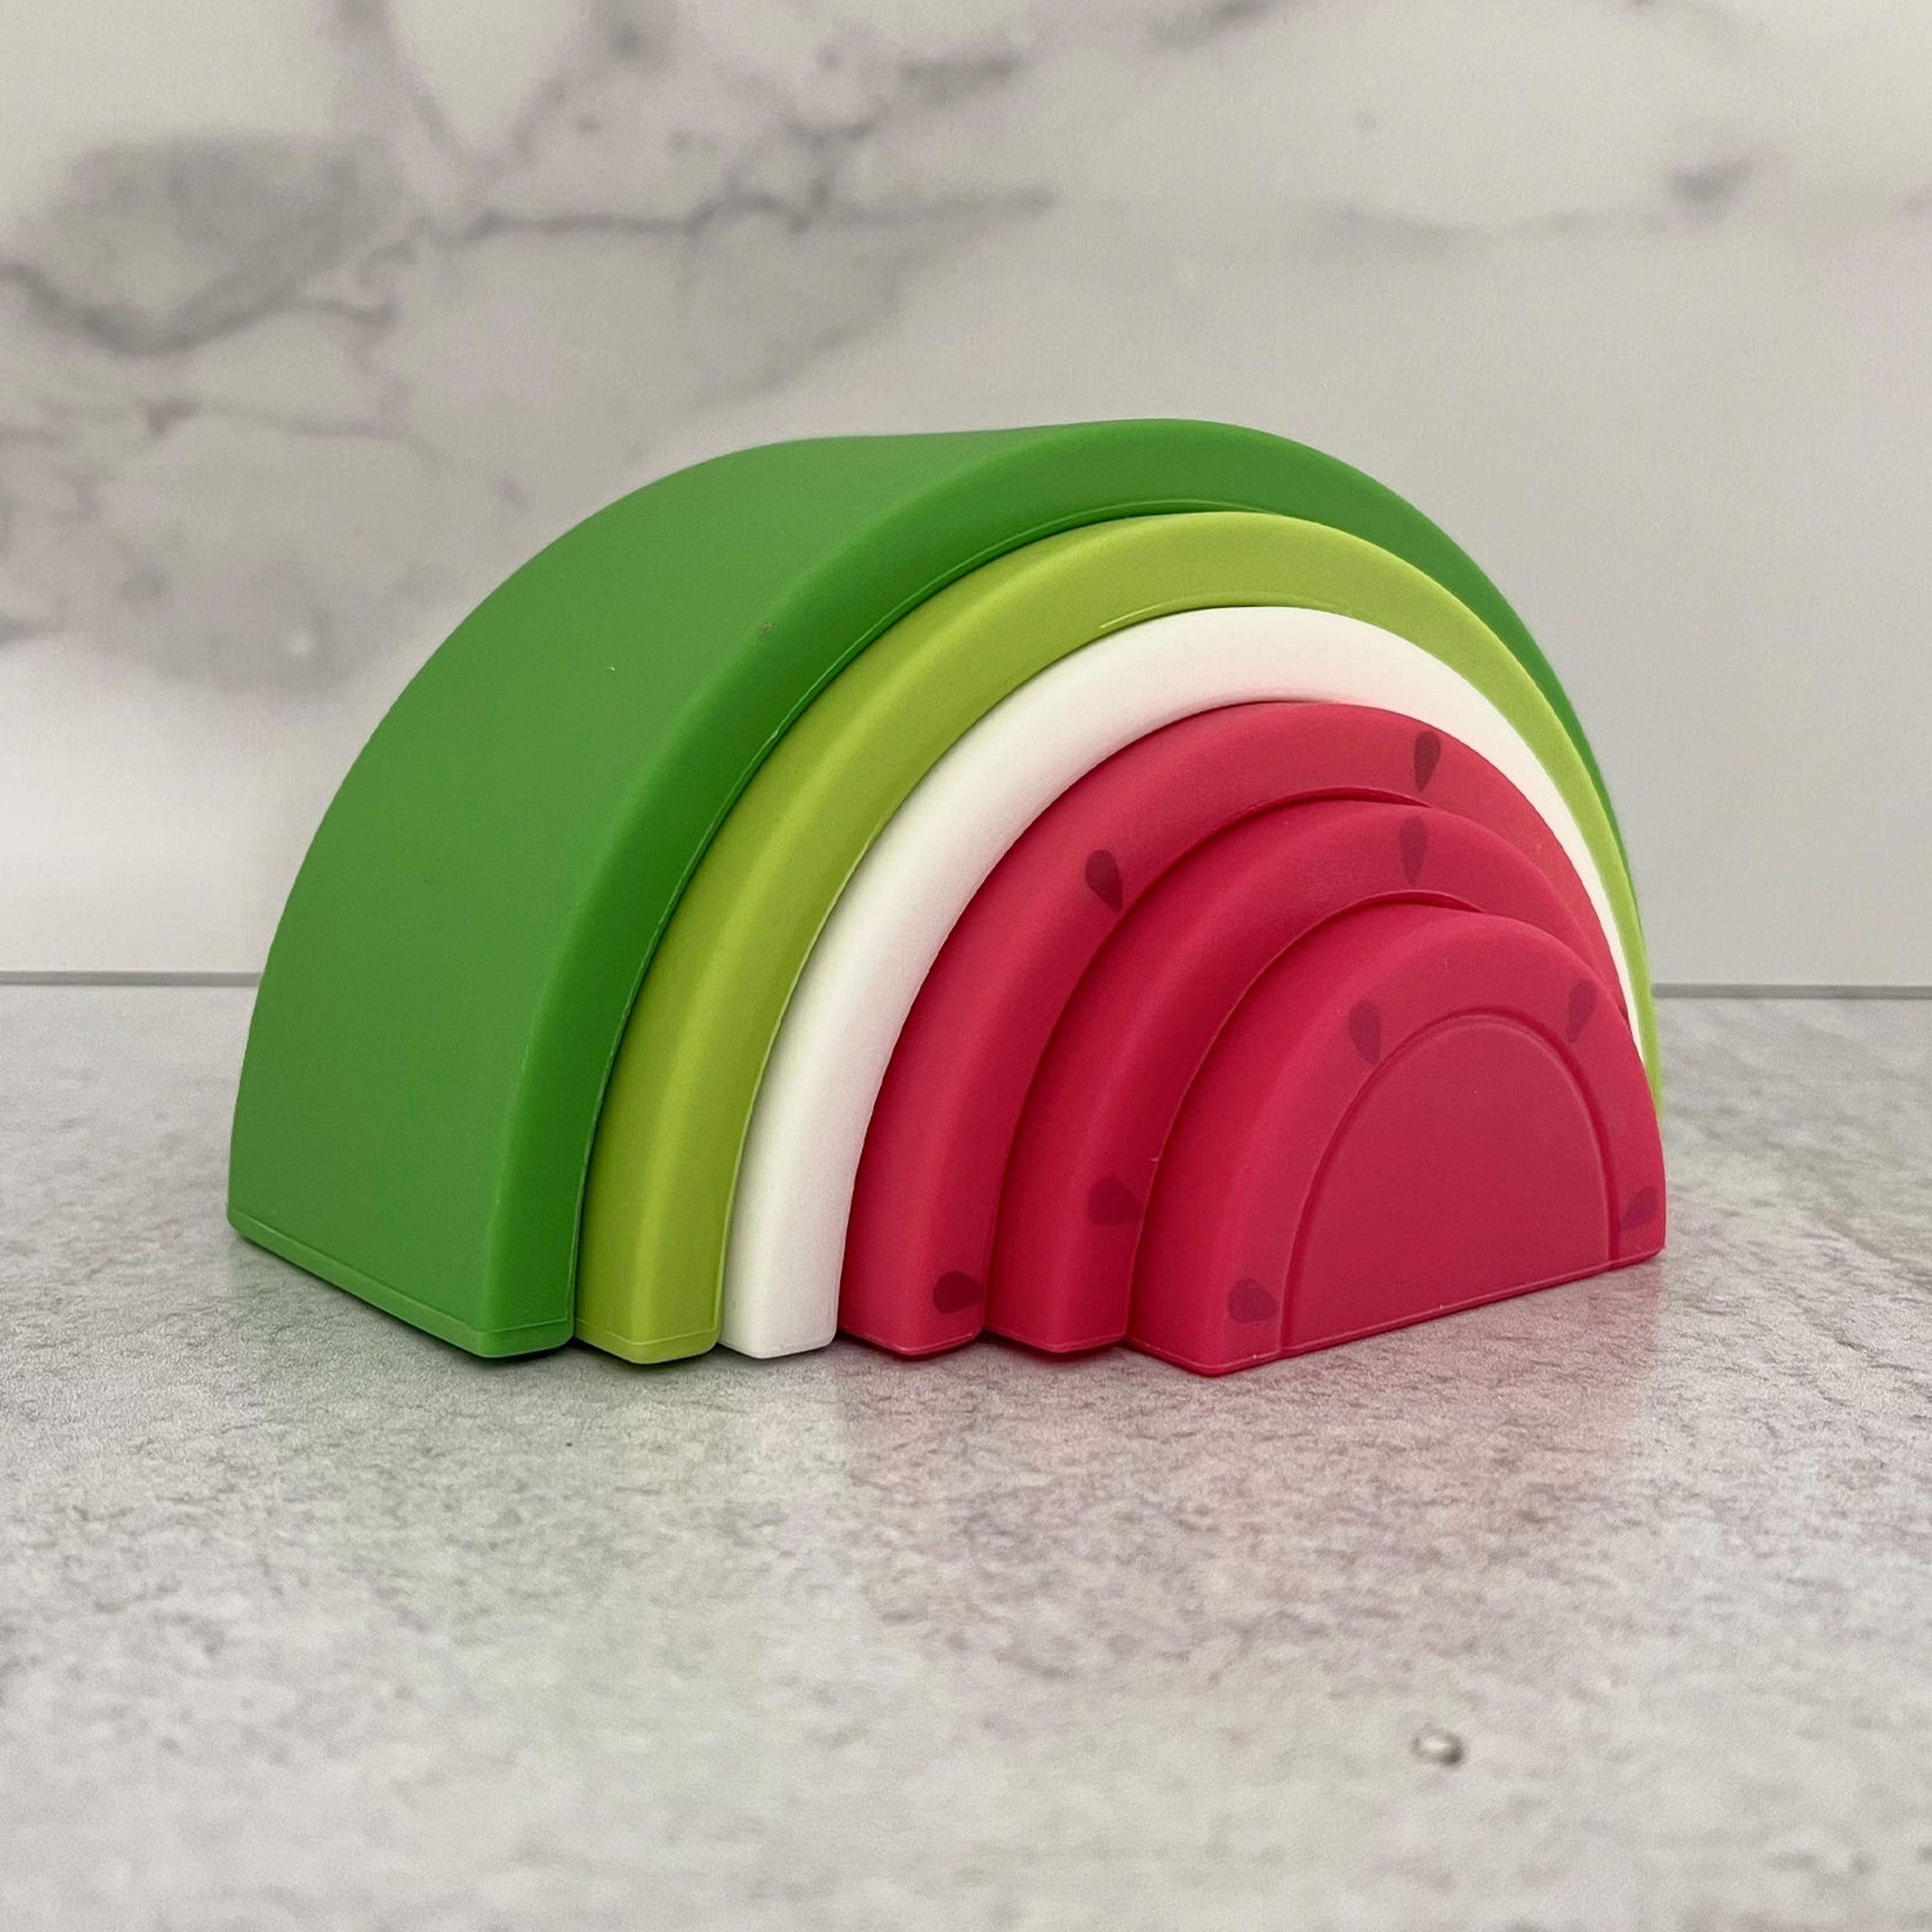 Watermelon Stacking Teether Toy